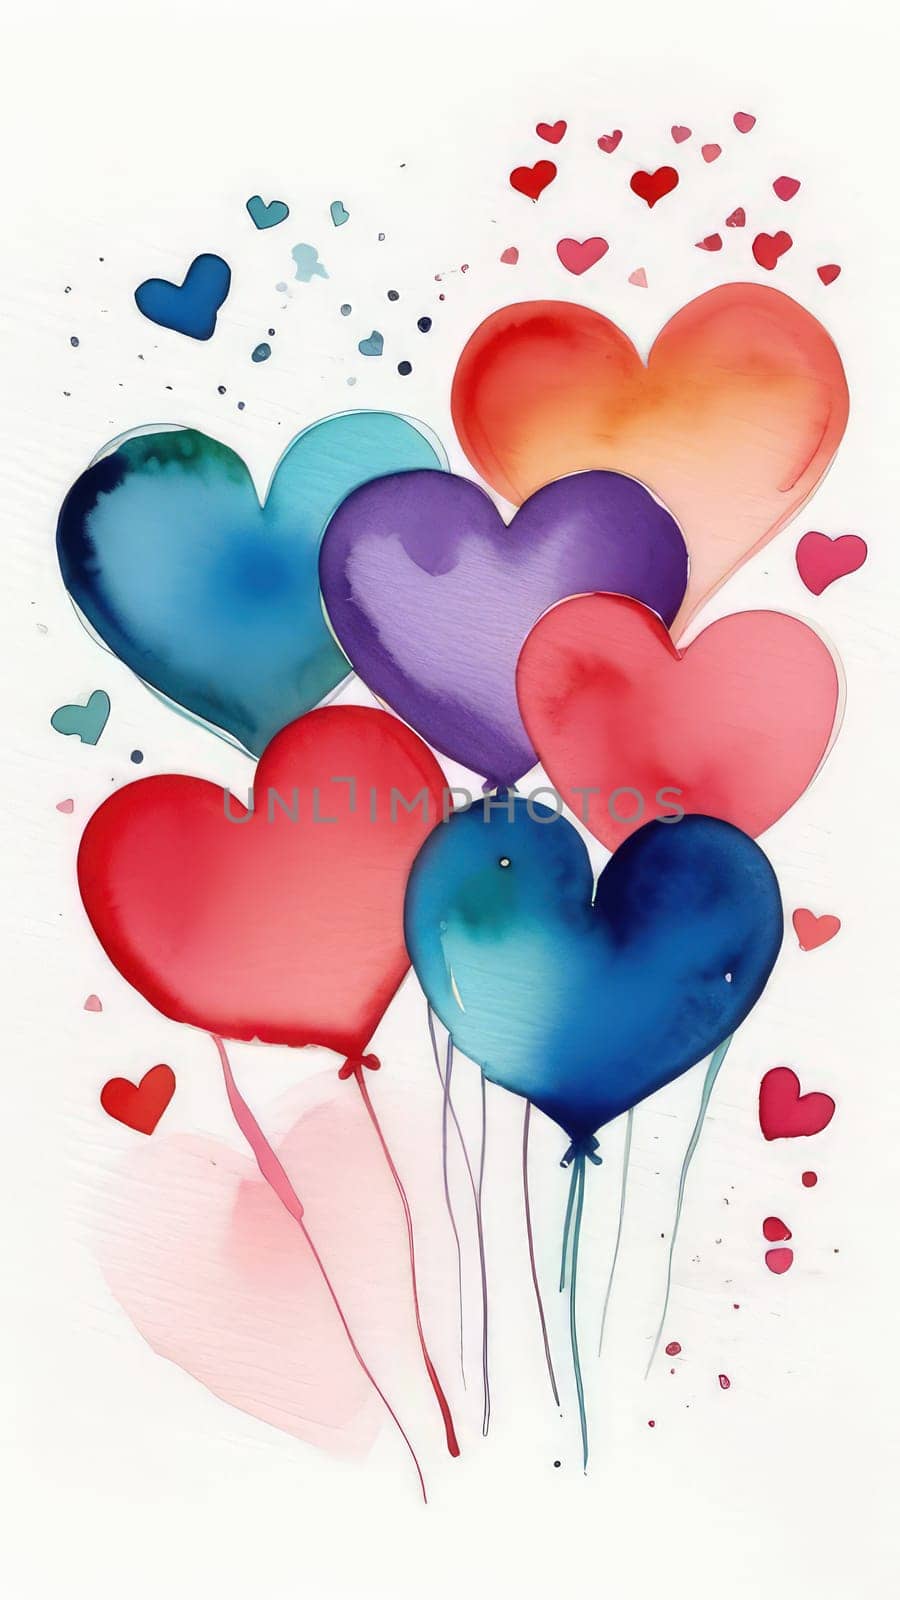 Valentines day watercolor abstract different hearts pastel background vertical banner. Perfect for Valentines Day card, romantic themed design, voucher, greeting card, wrapping paper. Copy space. by Angelsmoon